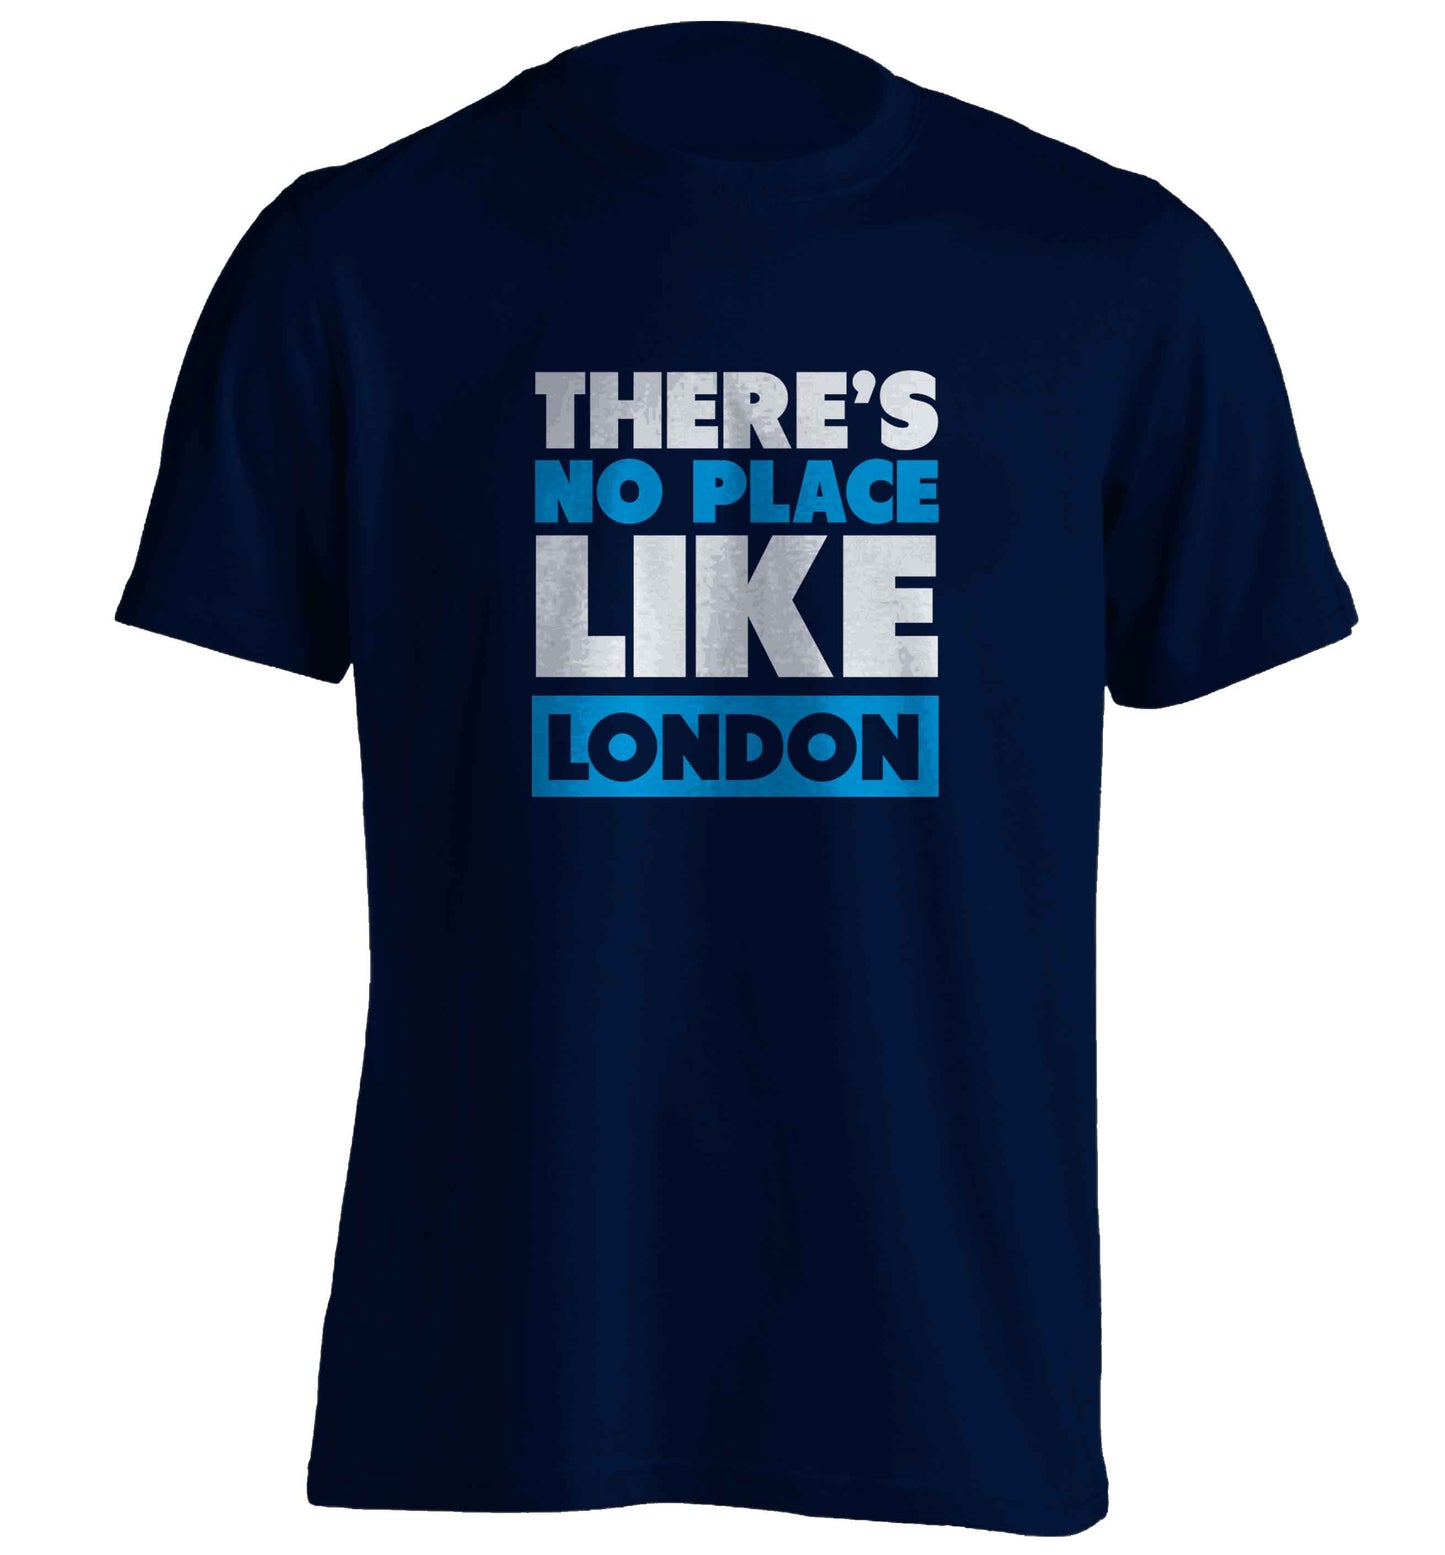 There's no place like England adults unisex navy Tshirt 2XL